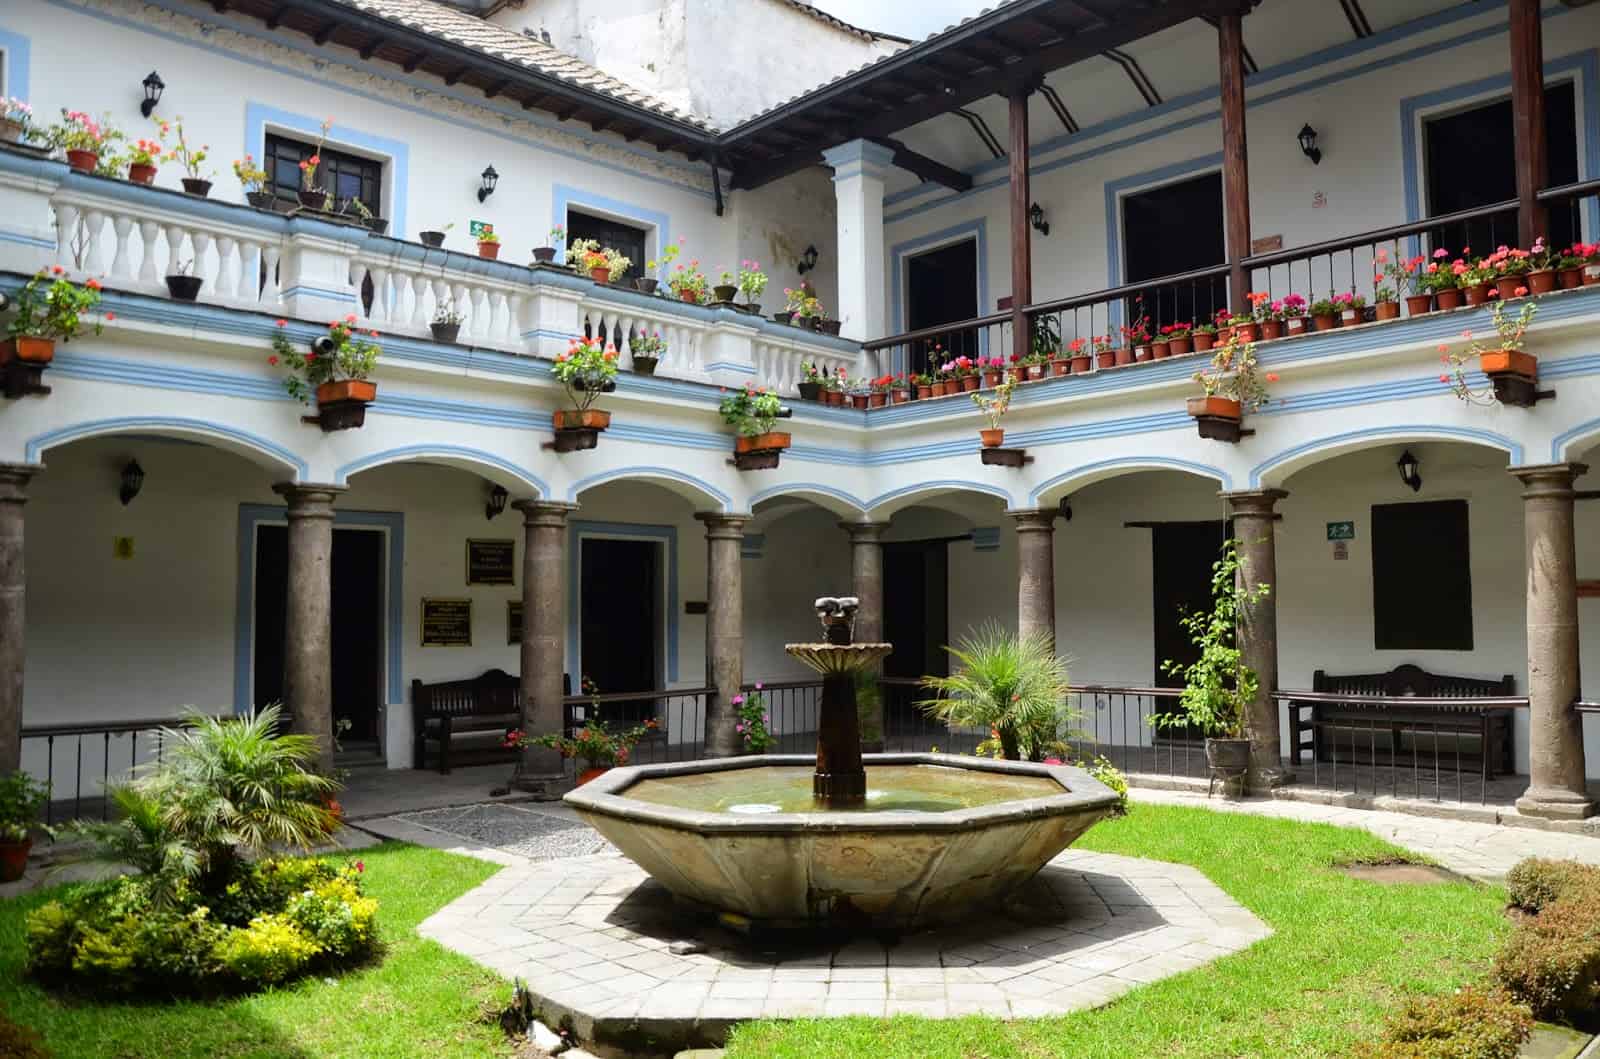 Courtyard of the Sucre House Museum in Quito, Ecuador